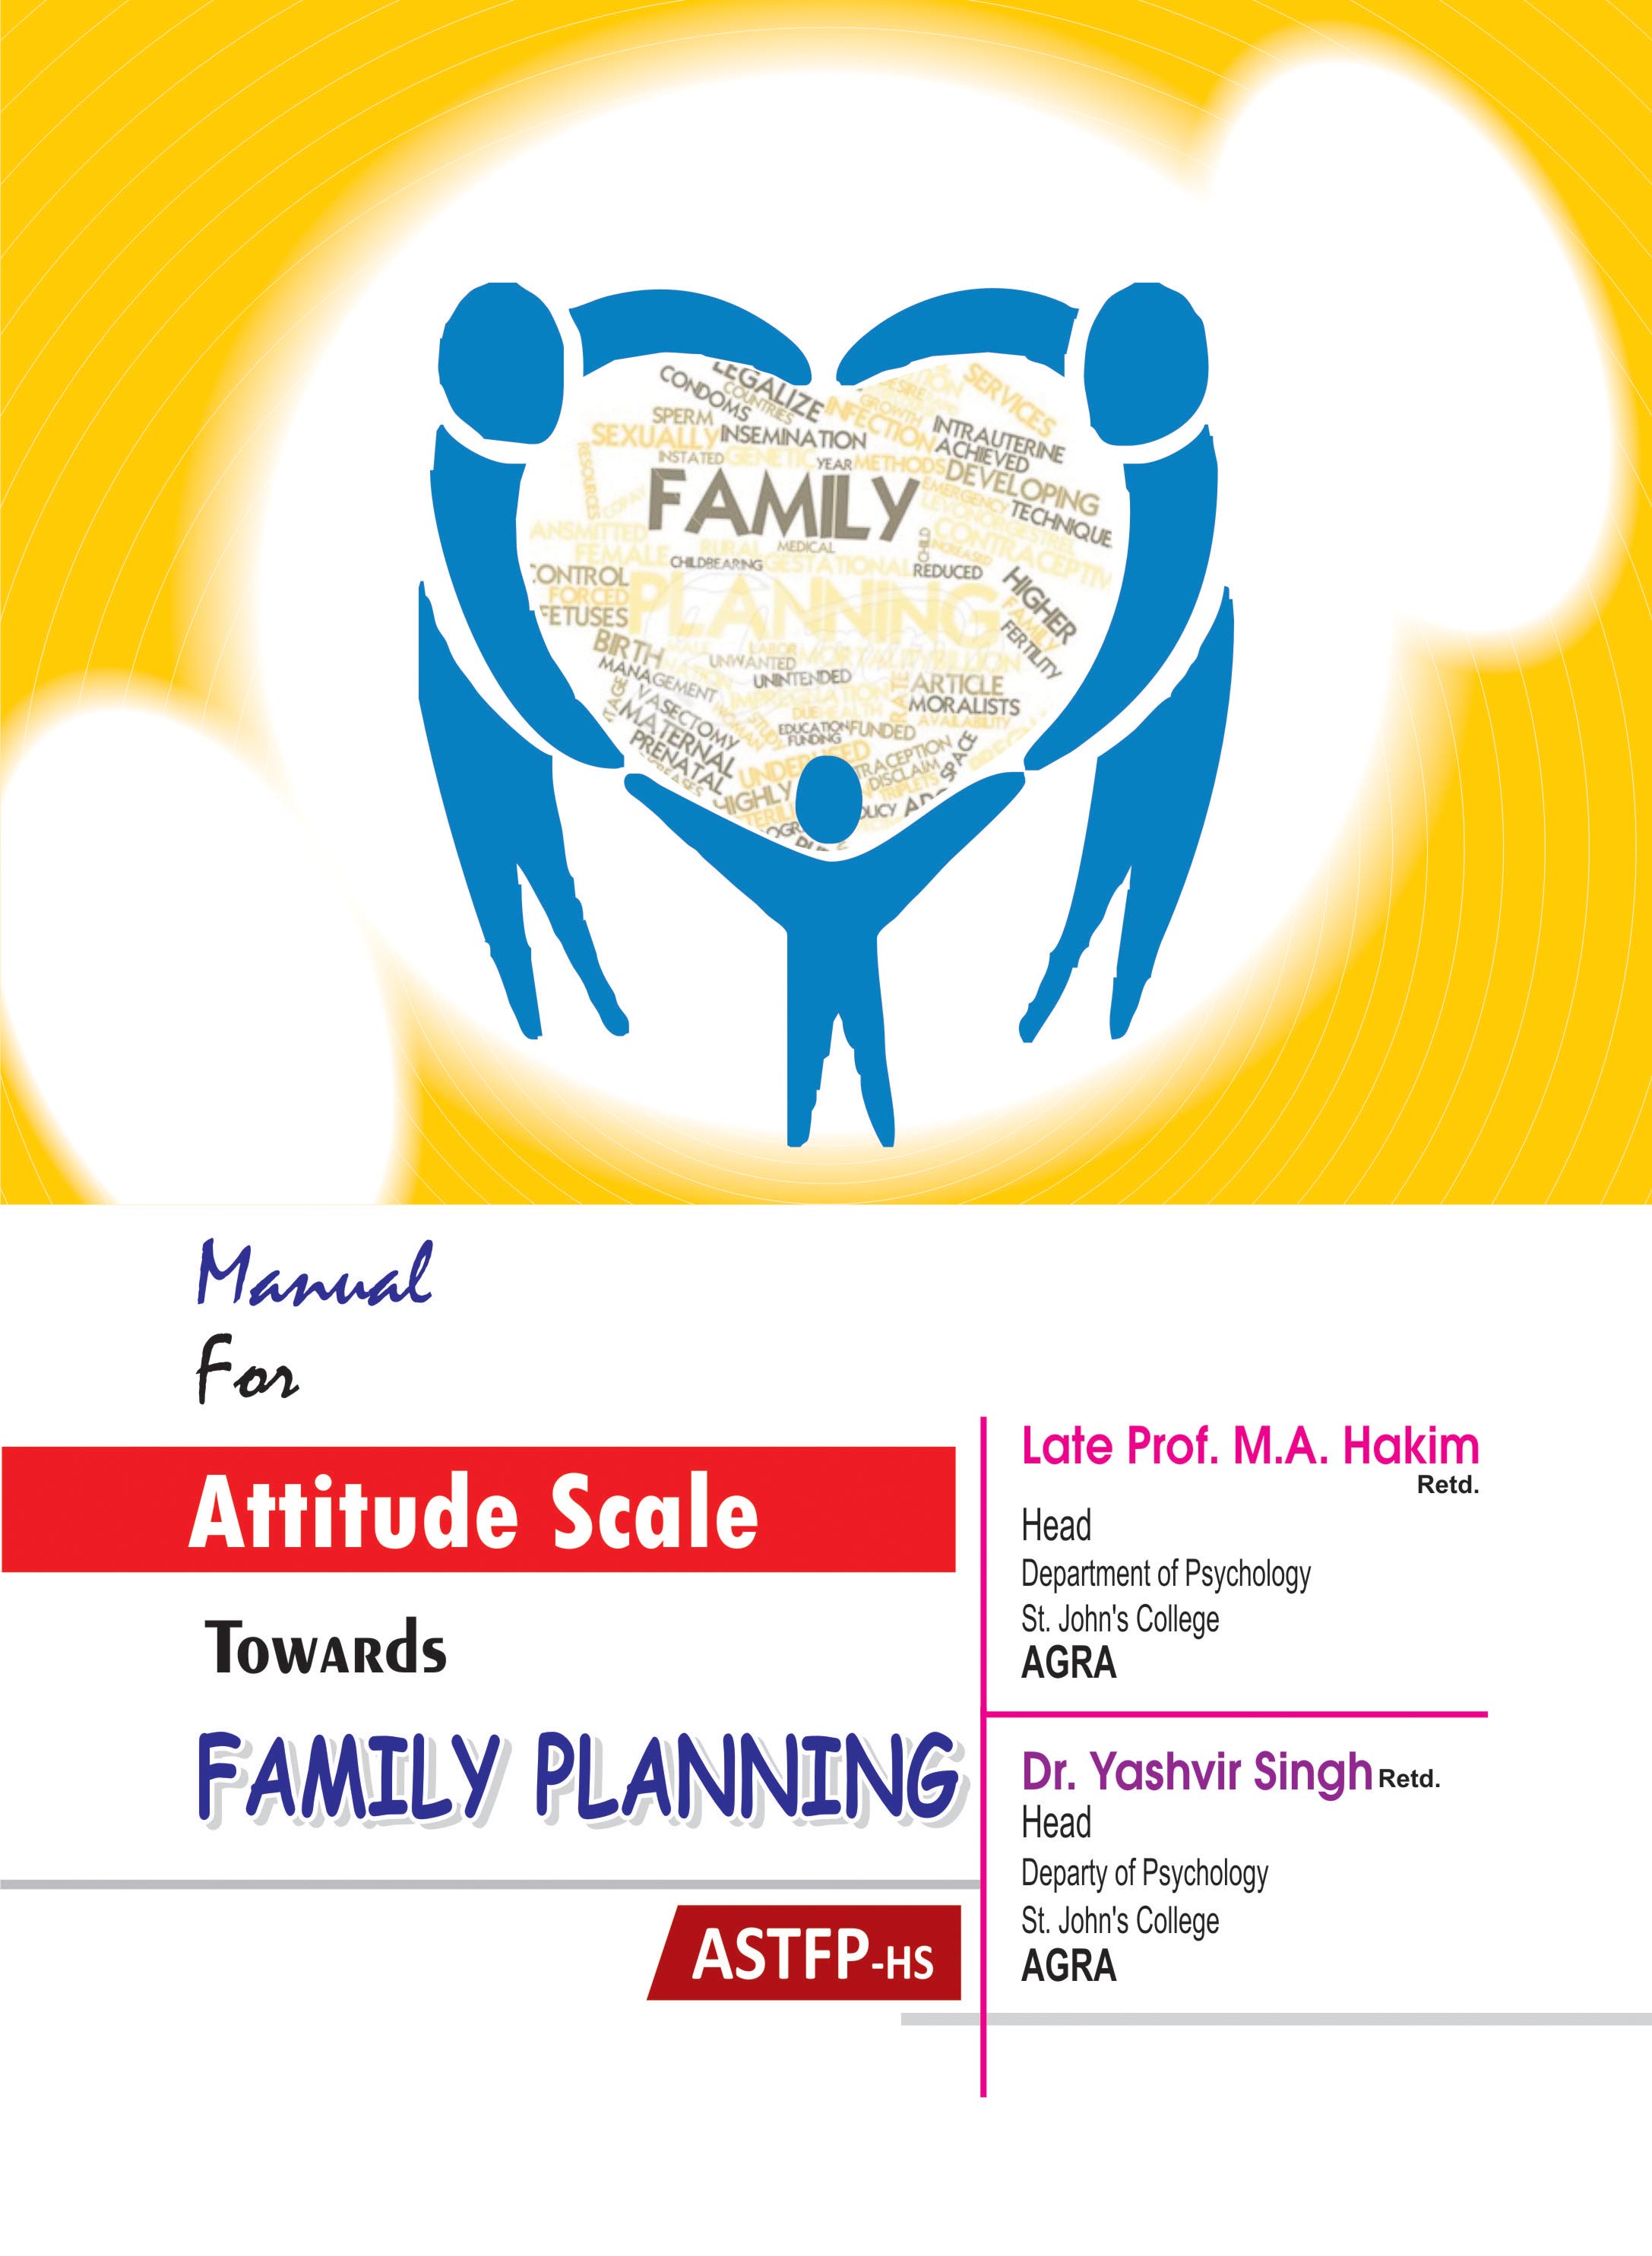 ATTITUDE-SCALE-TOWARDS-FAMILY-PLANNING